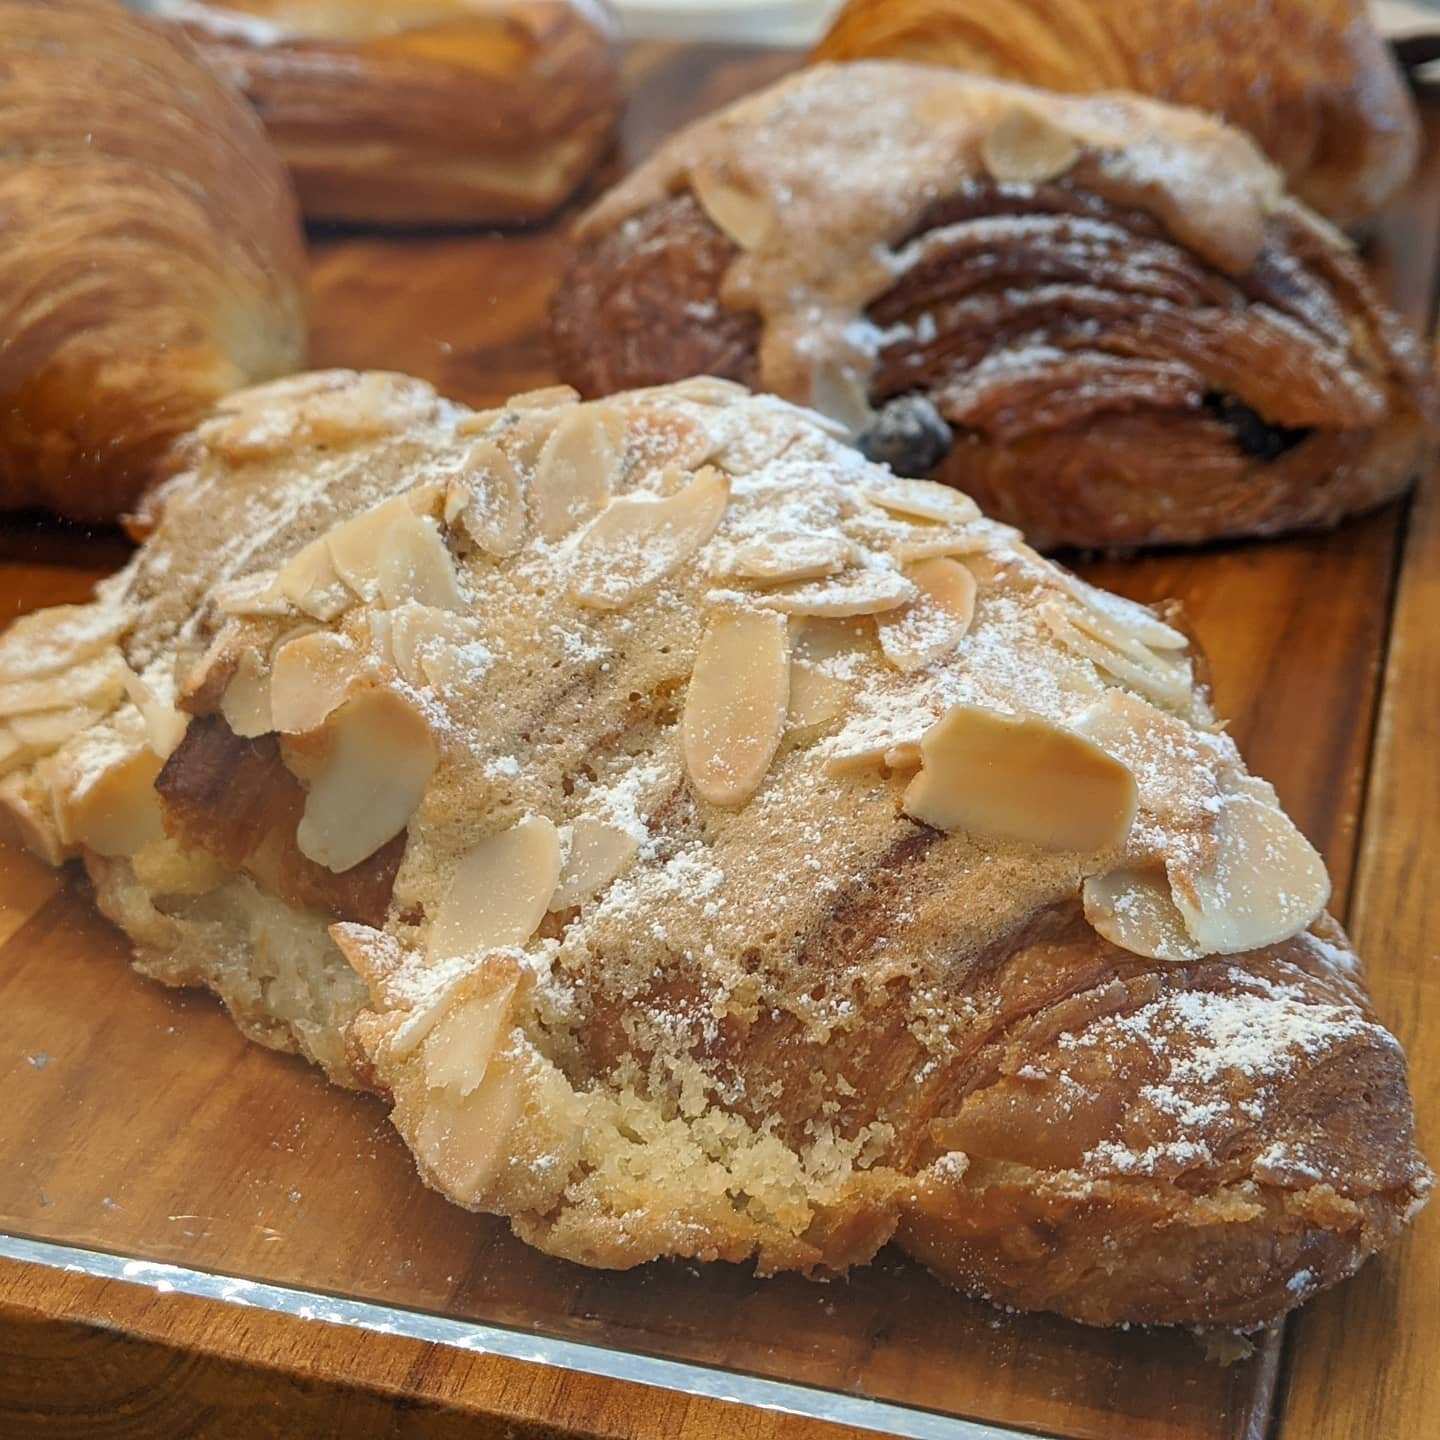 This almond croissant is calling your name! 
Stop by and grab yourself a take away coffee and crossiant - the perfect combo! 
.
.
.
.
.
.
.
.
.
.
.
#noisette #felixculpacoffee #resevoir #foodaholic #specialtycoffee #coffeemelbourne #Melbournecafes #b